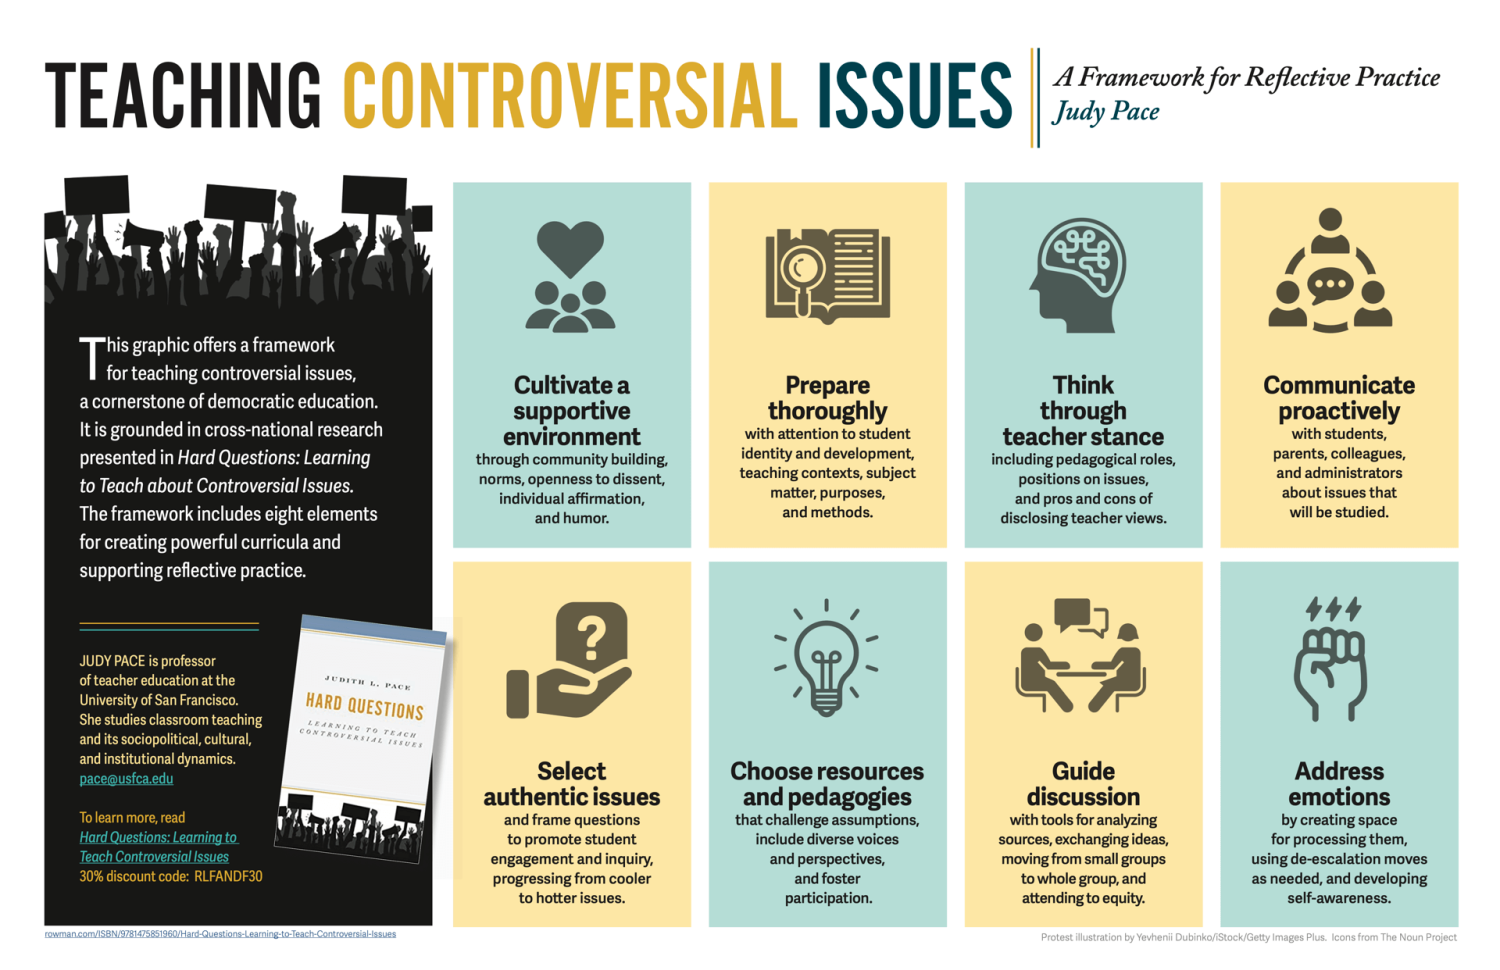 Teaching controversial issues - A framework for reflective practice